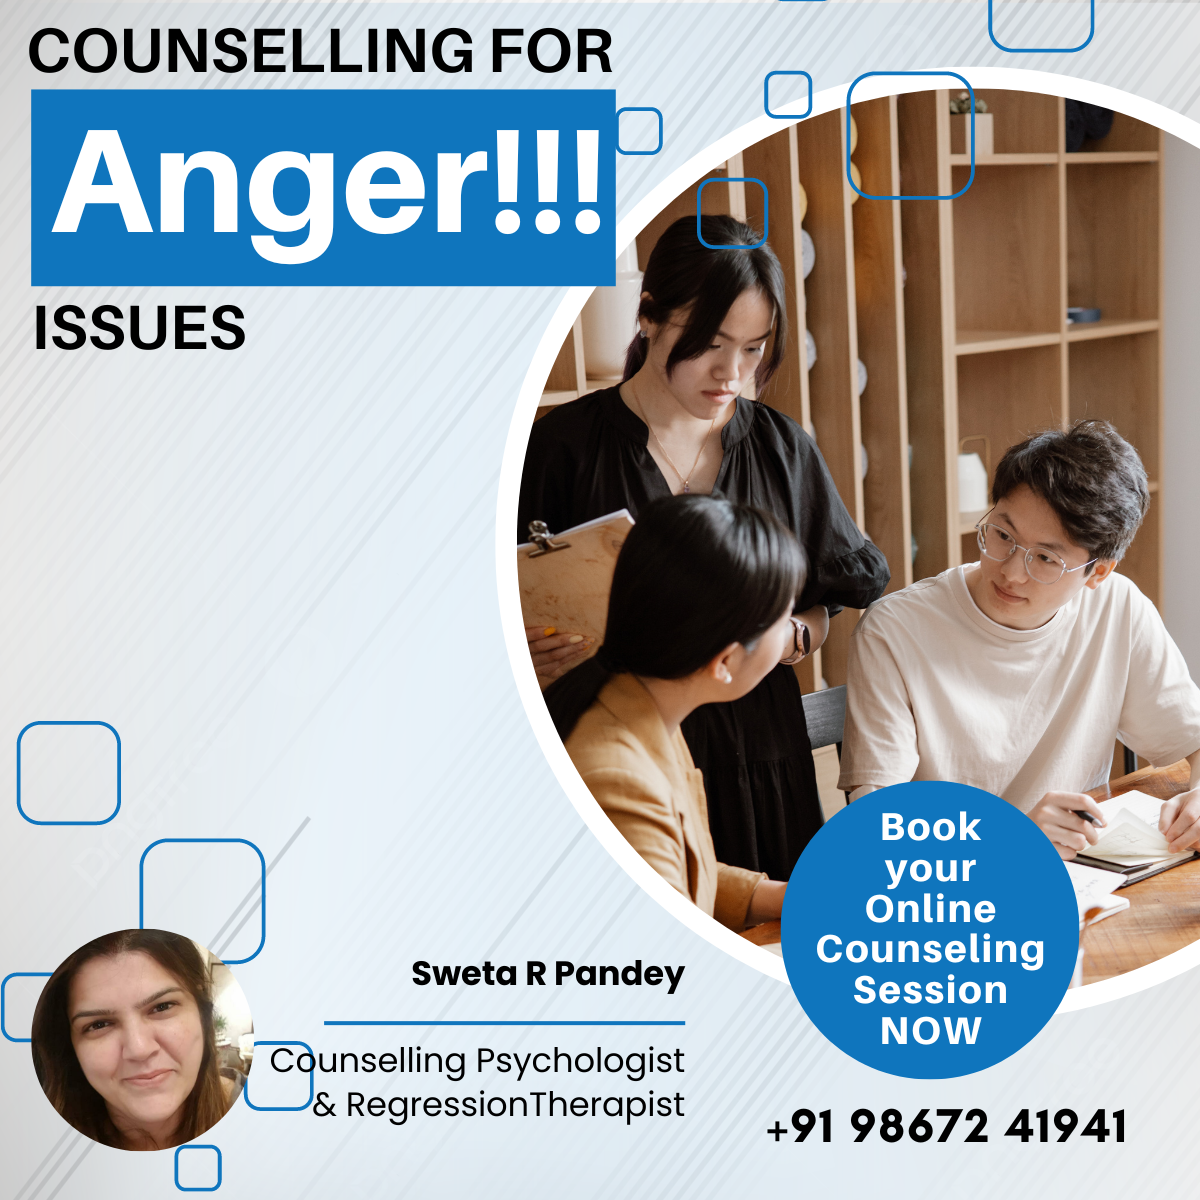 Counselling for Anger Issues - Sweta R Pandey - Haridwar